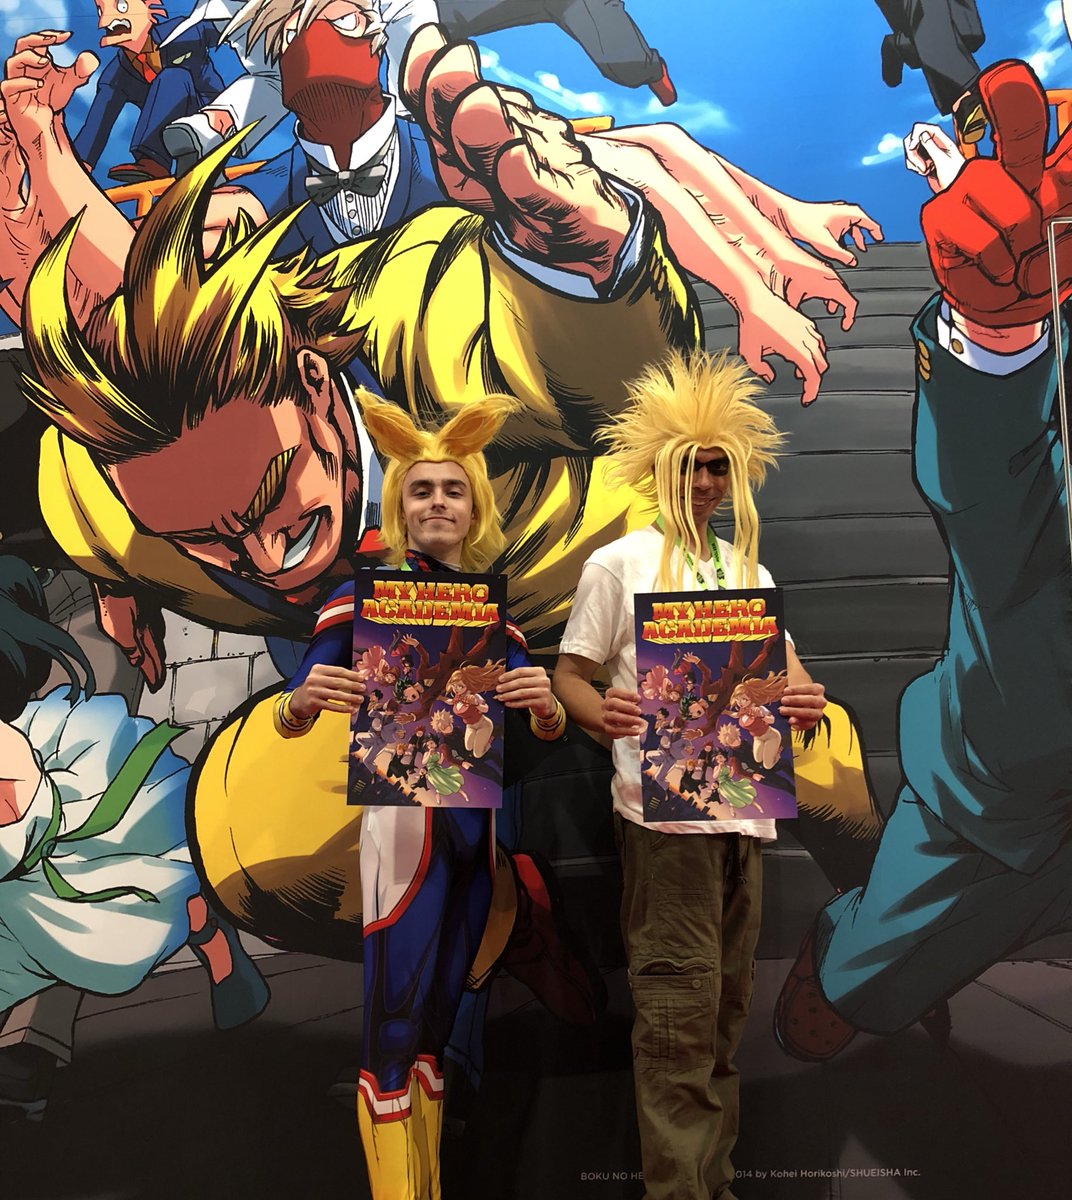 VIZ on Twitter: 'PLUS ULTRA! My Hero Academia All Might Rising posters are  available at the VIZ Booth #1336! Check back daily for details.  https://t.co/rgbPlGOigS' / Twitter